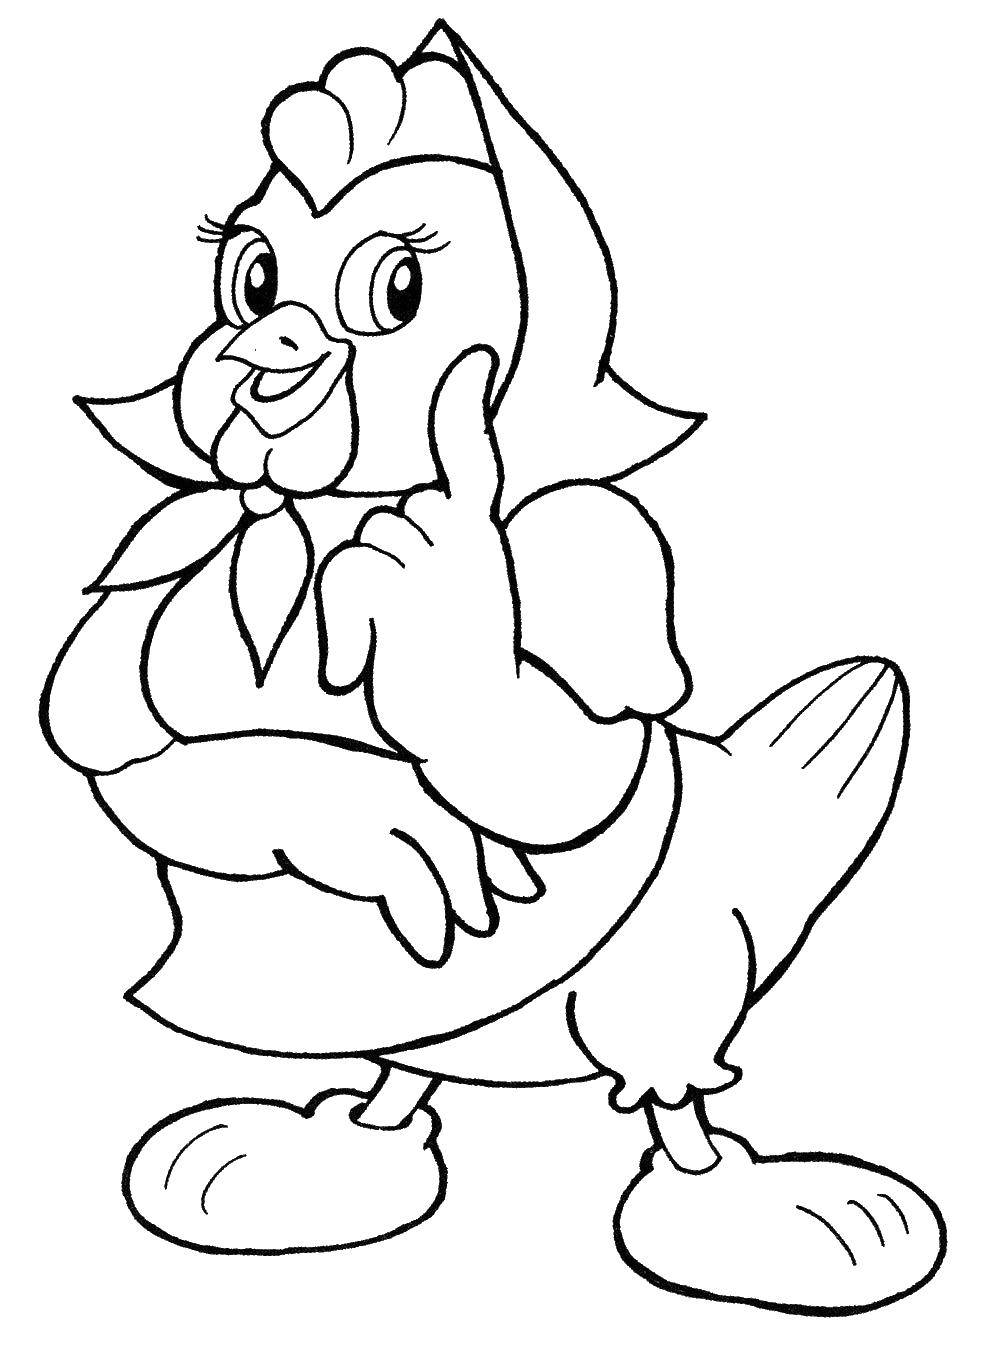 Coloring Chicken in an apron. Category Pets allowed. Tags:  Chicken, poultry.